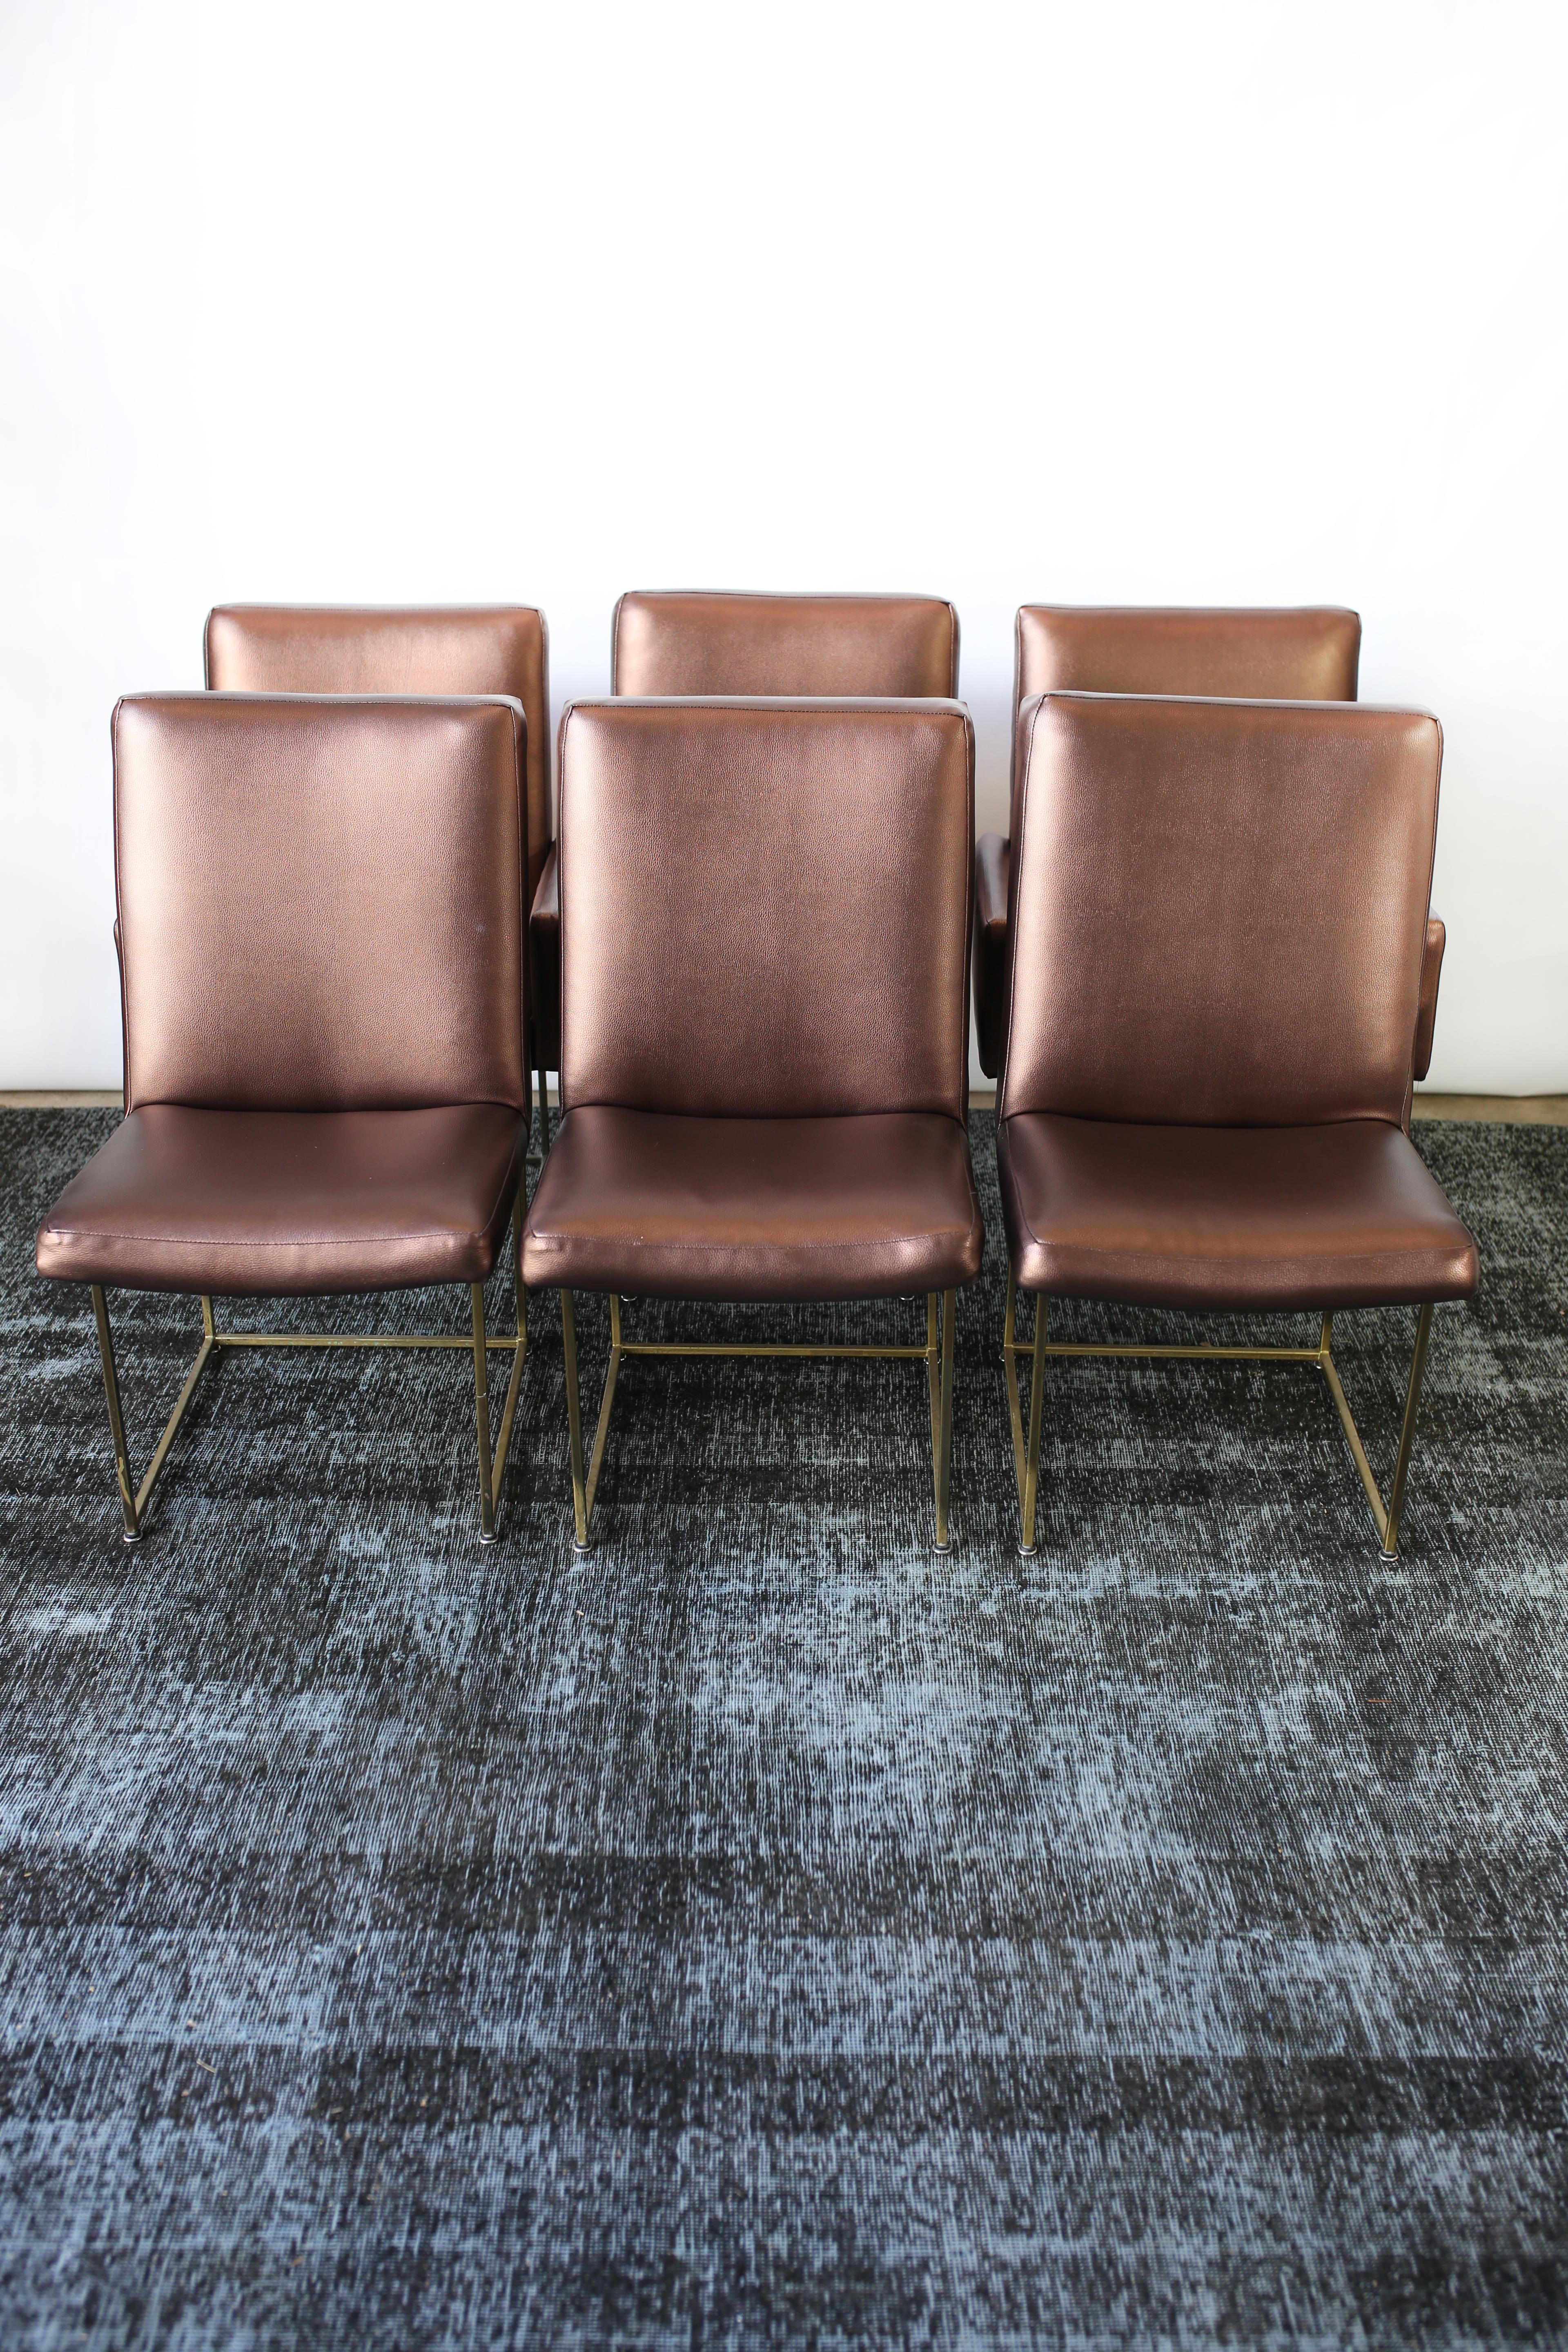 Milo Baughman was a modern furniture designer, with forward-thinking and distinctive American designs. This distinct set of ten Milo Baughman dining chairs are in overall good condition and wear consistent with age and use. Reupholstered in a